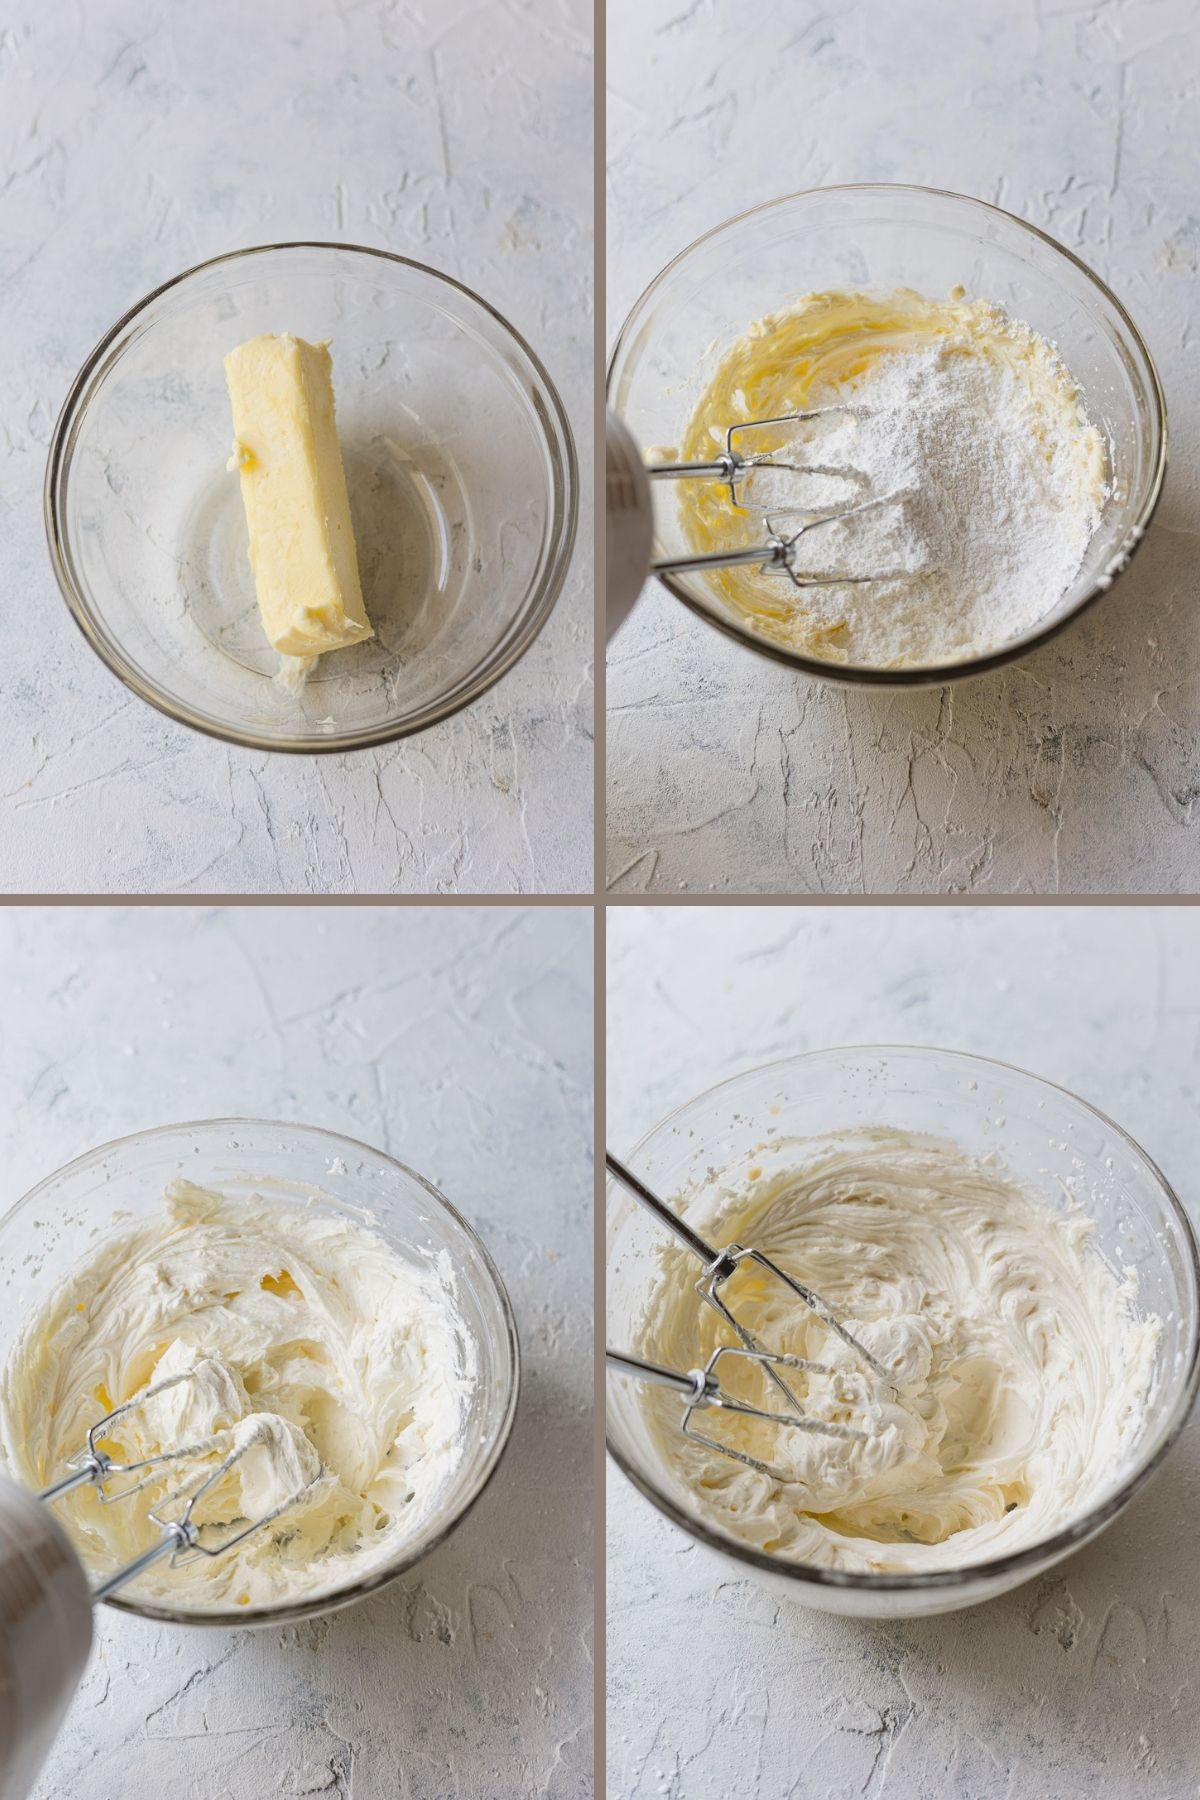 Step by step making buttercream frosting with a hand mixer.